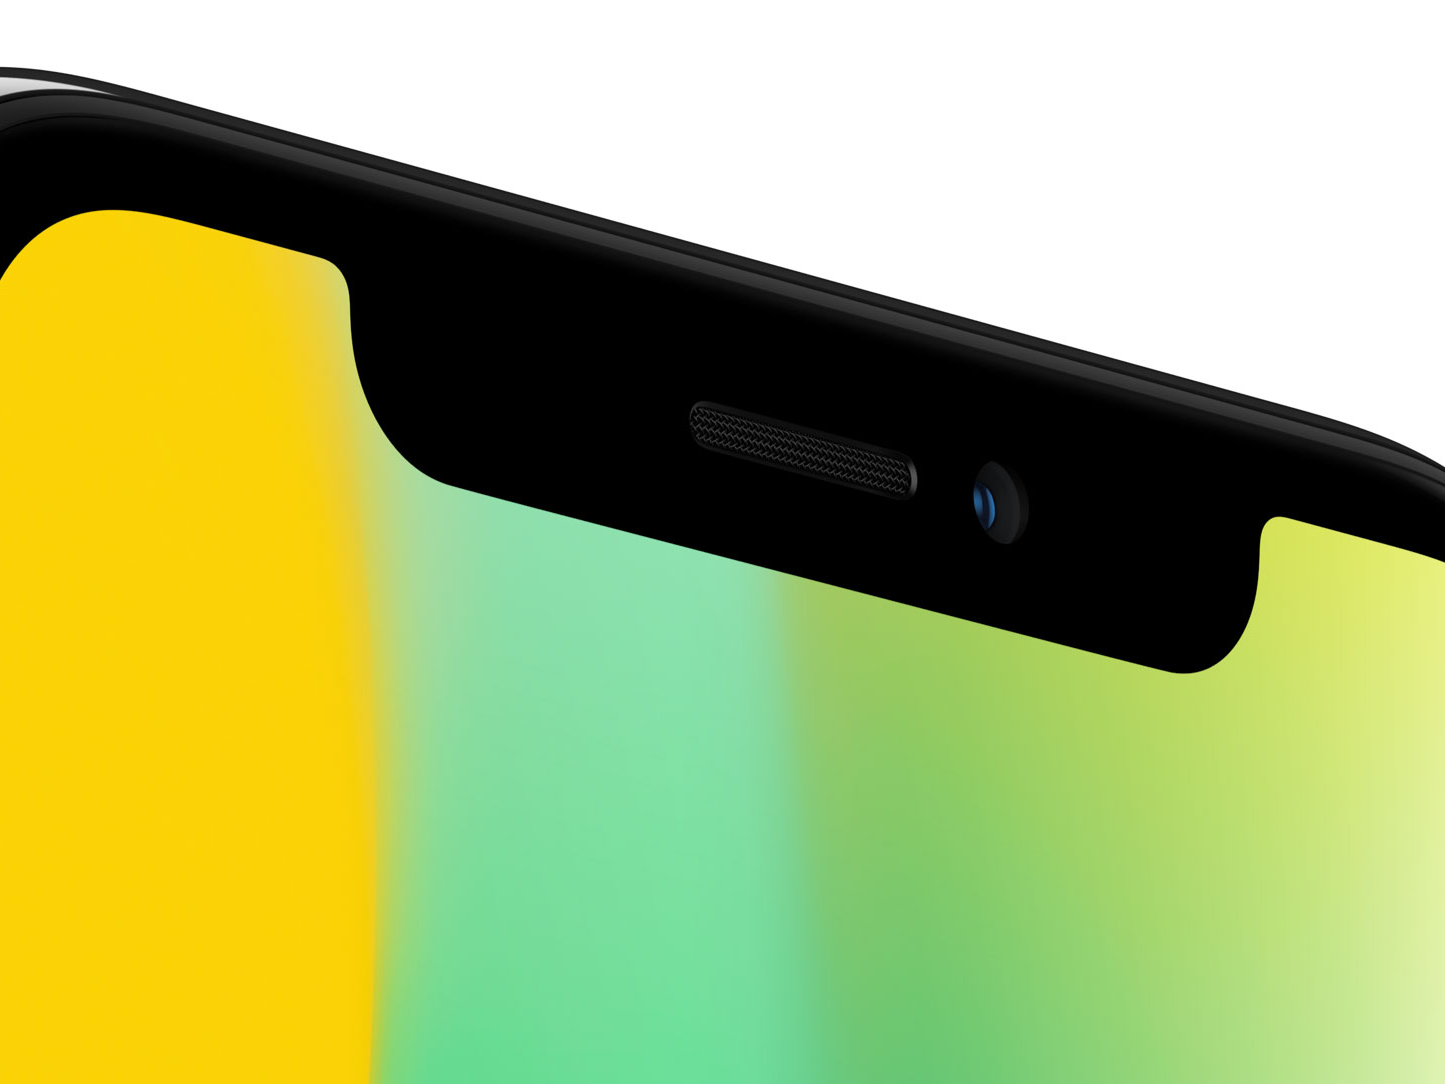 how-the-iphone-x-and-its-notch-will-handle-videos-png.77920